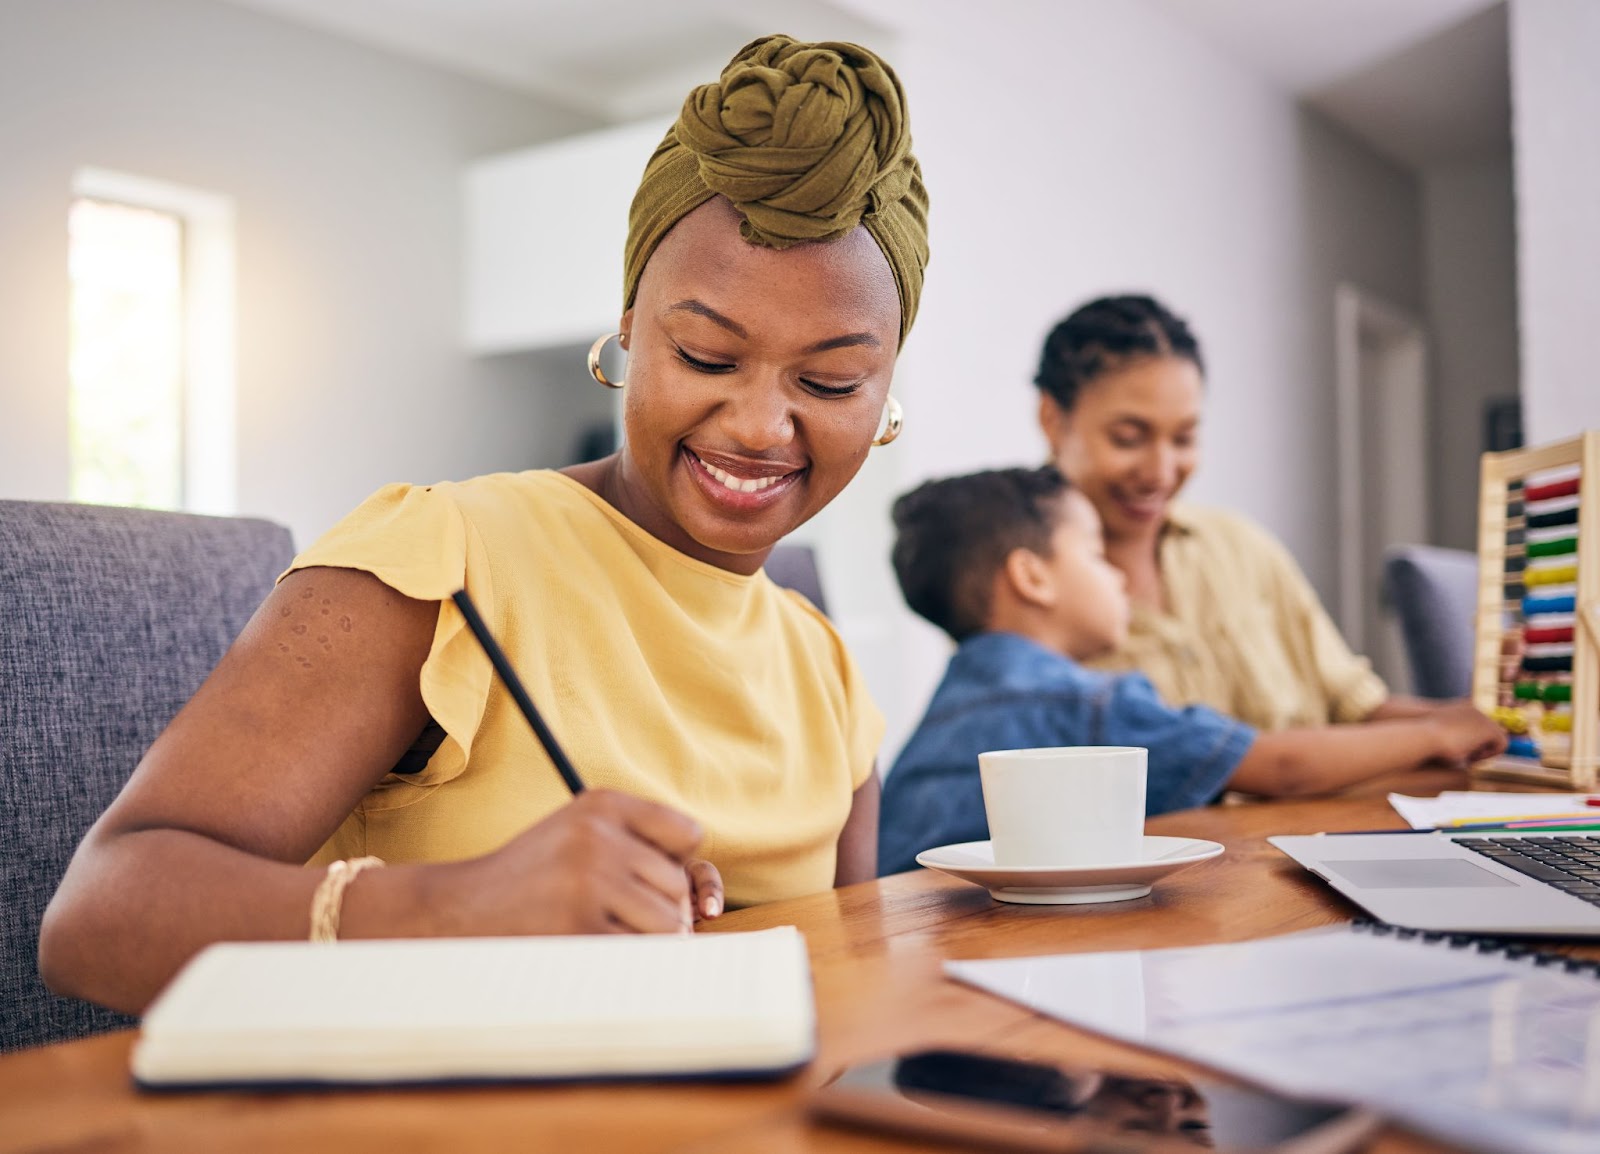 <p>Balancing your entrepreneurial dreams with family life can definitely feel like a juggling act, but with some smart strategies, you can keep all the balls in the air. Here’s a straightforward approach to managing both:</p>